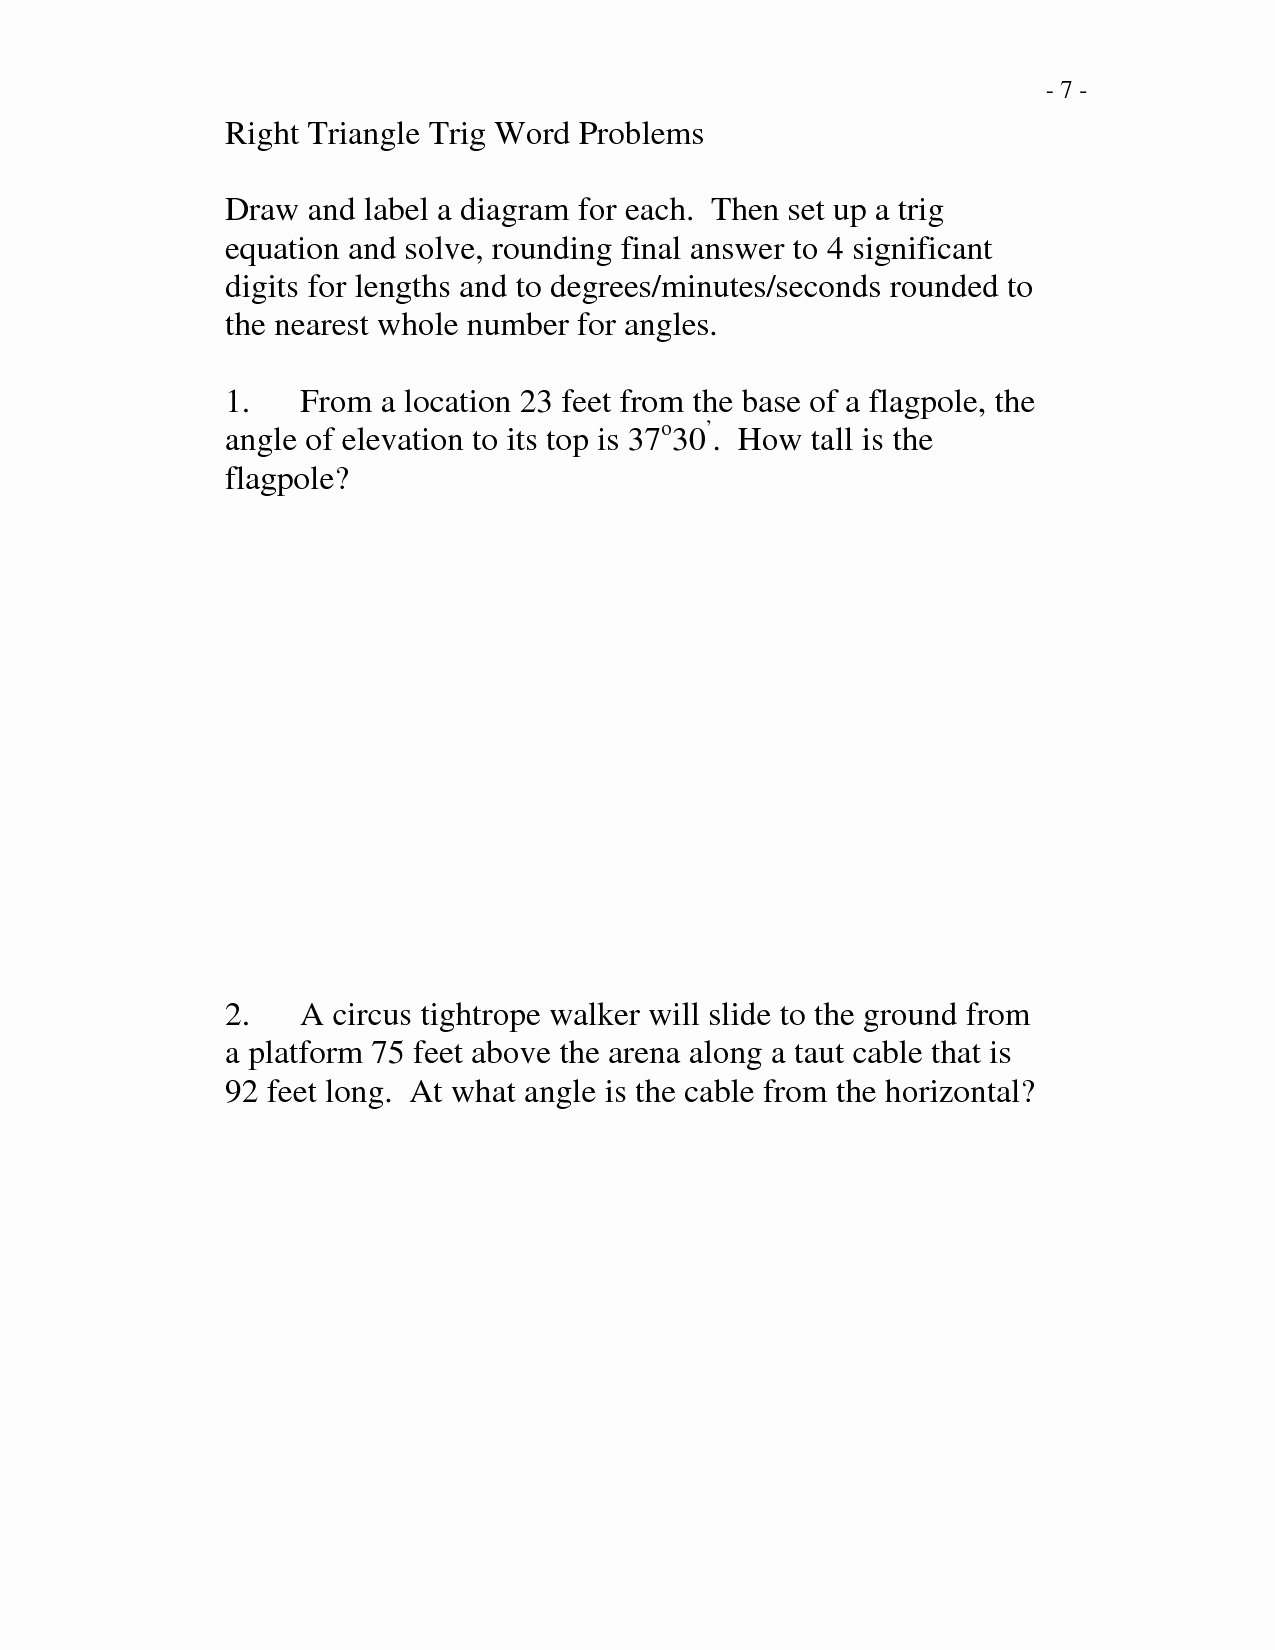 Right Triangle Word Problems Worksheet Unique 11 Best Of Right Triangle Trigonometry Worksheet